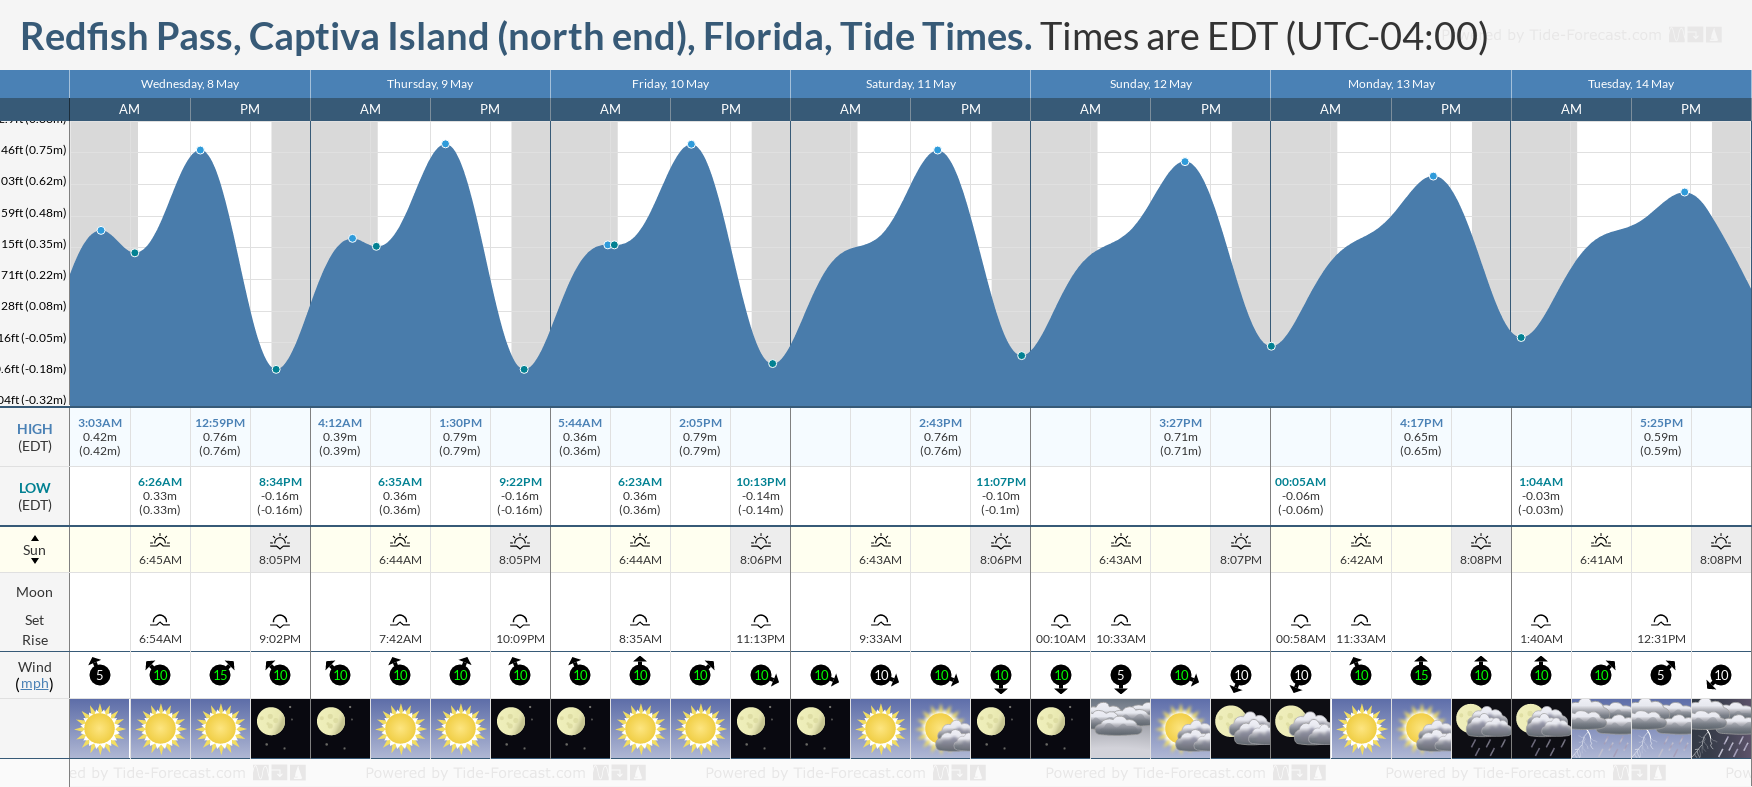 Redfish Pass, Captiva Island (north end), Florida Tide Chart including high and low tide times for the next 7 days